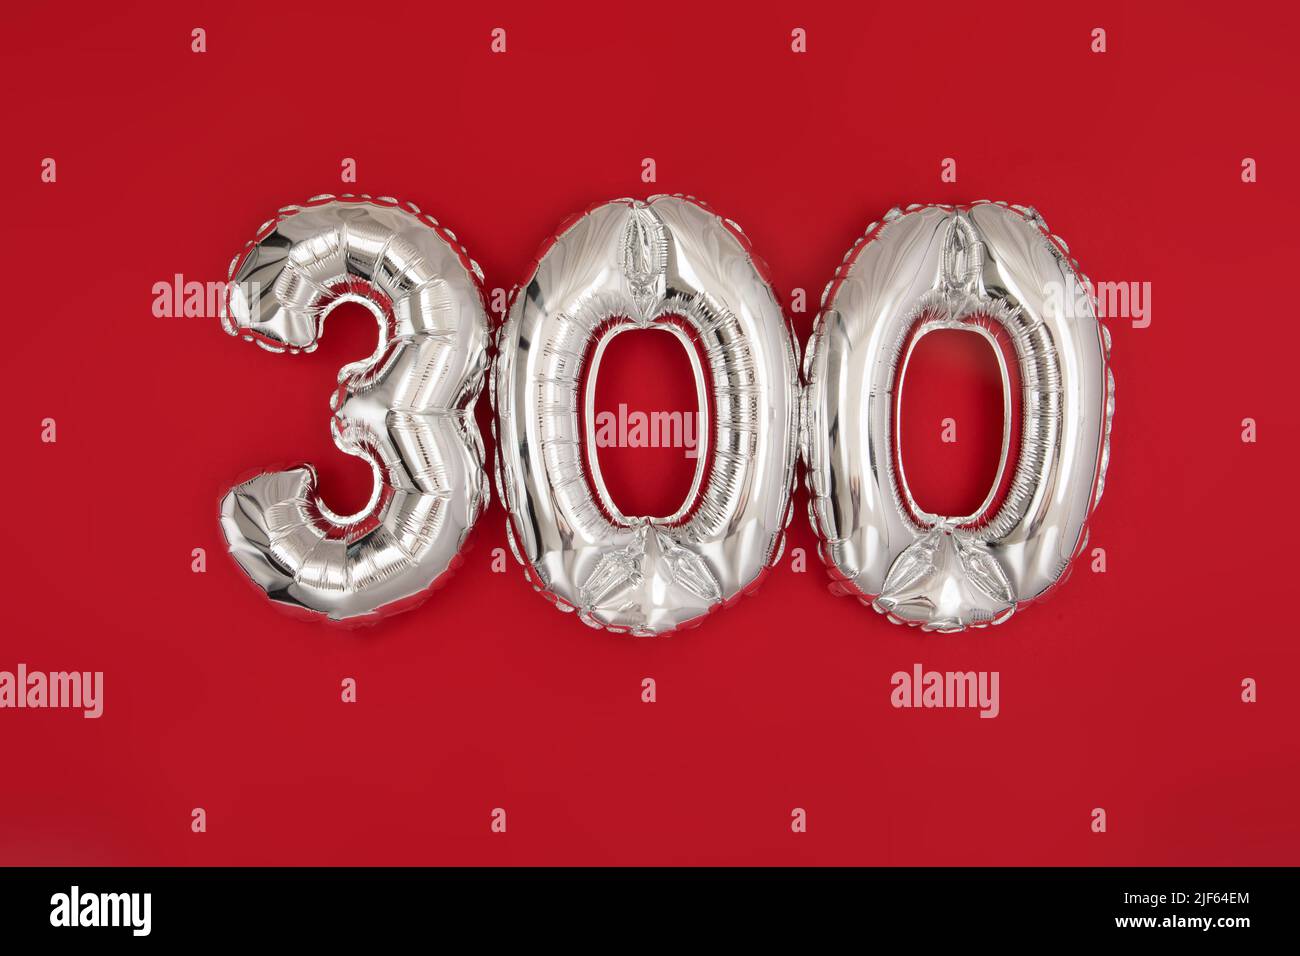 Silver balloon showing number 300 on red background Stock Photo